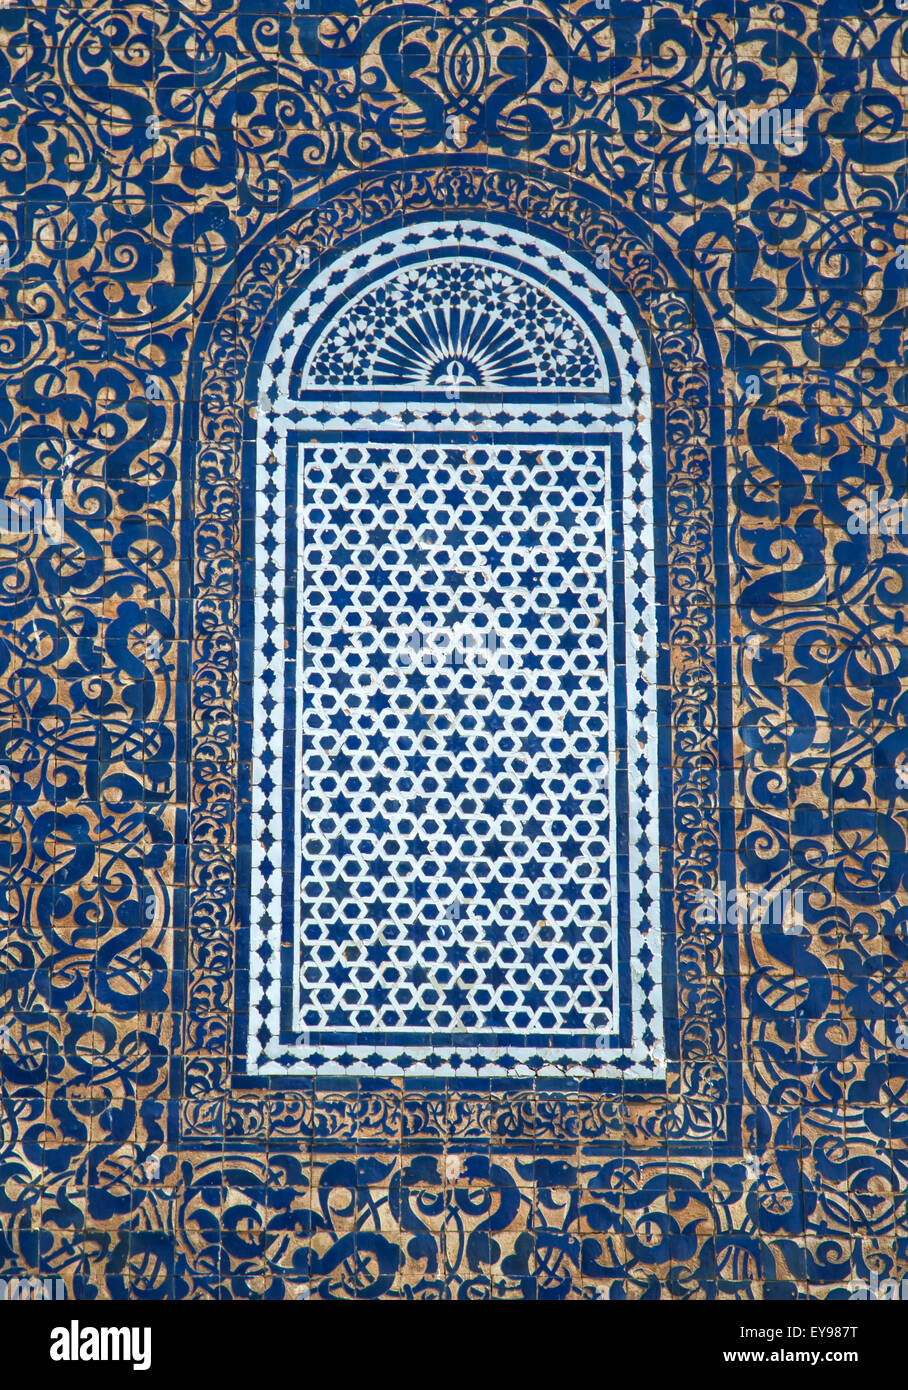 Detail of the traditional window from Fes, Morocco Stock Photo